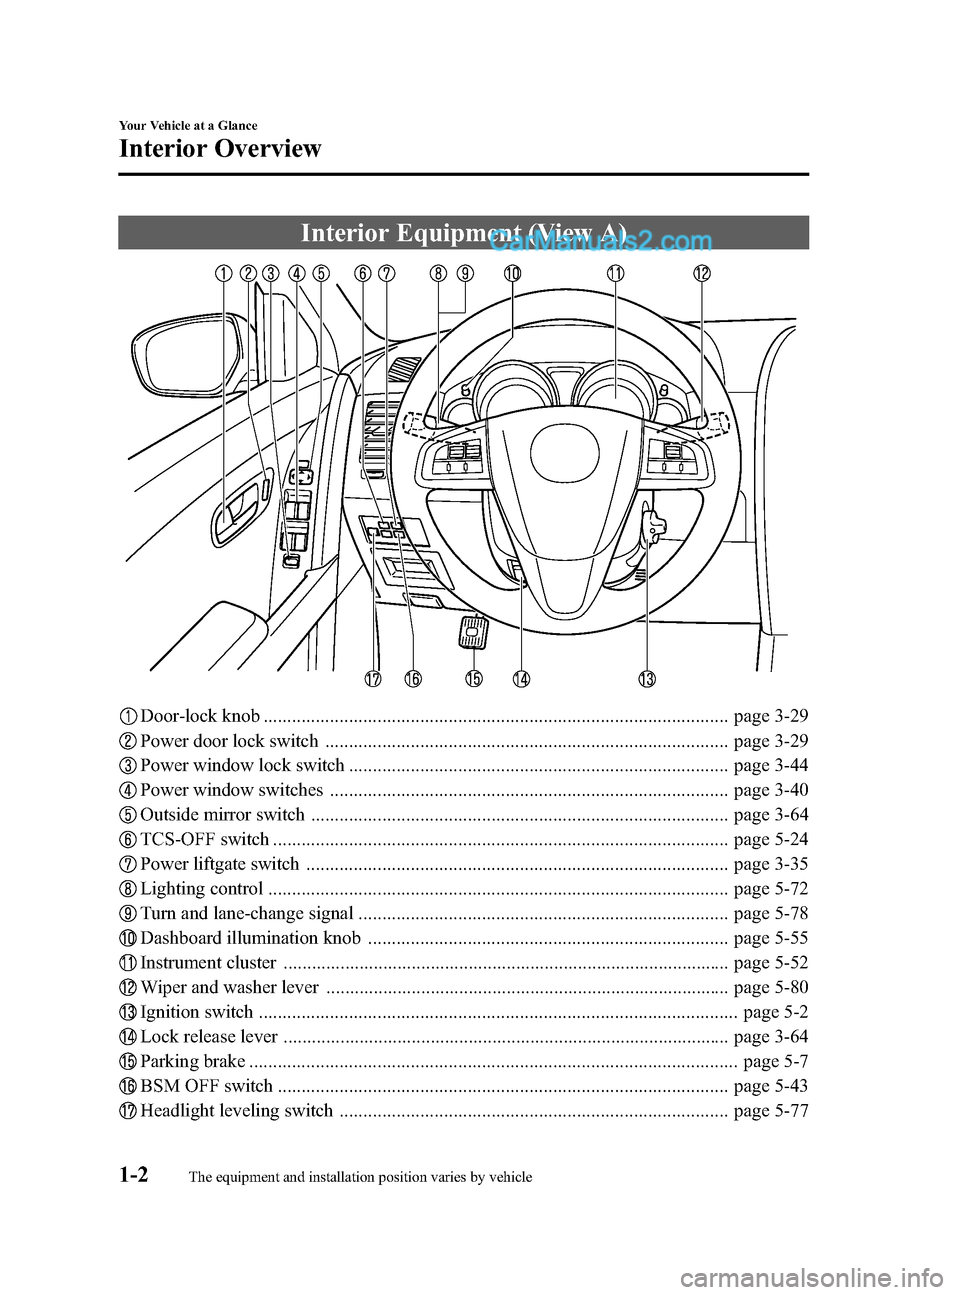 MAZDA MODEL CX-9 2015  Owners Manual (in English) Black plate (8,1)
Interior Equipment (View A)
Door-lock knob .................................................................................................. page 3-29
Power door lock switch .......